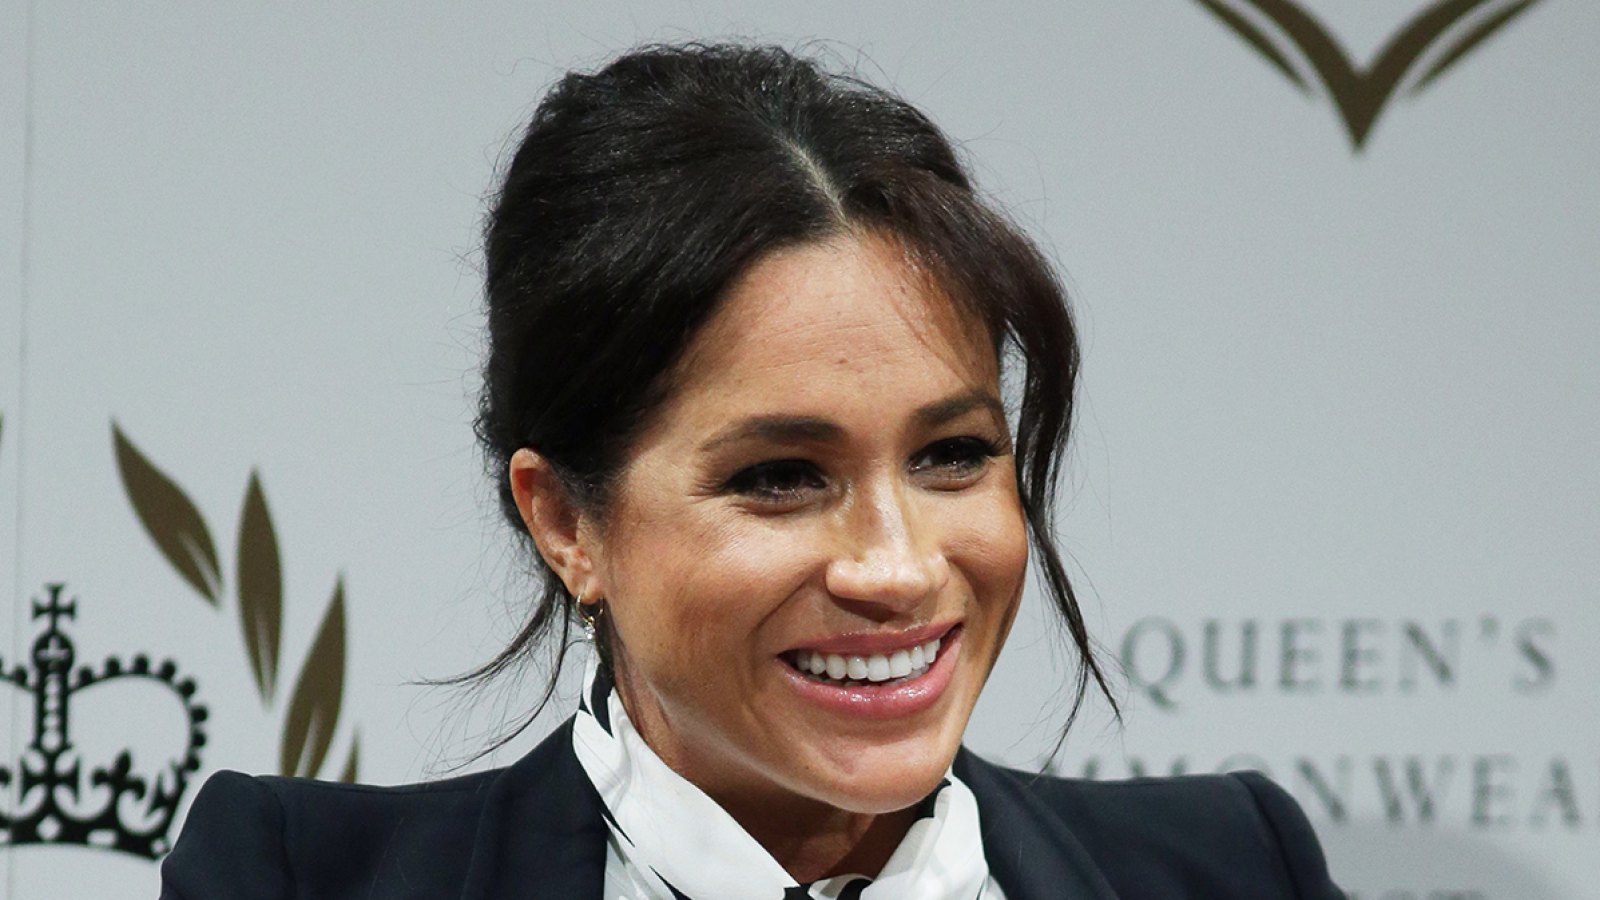 Duchess Meghan and Prince Harry Want Their Baby to Be a Feminist